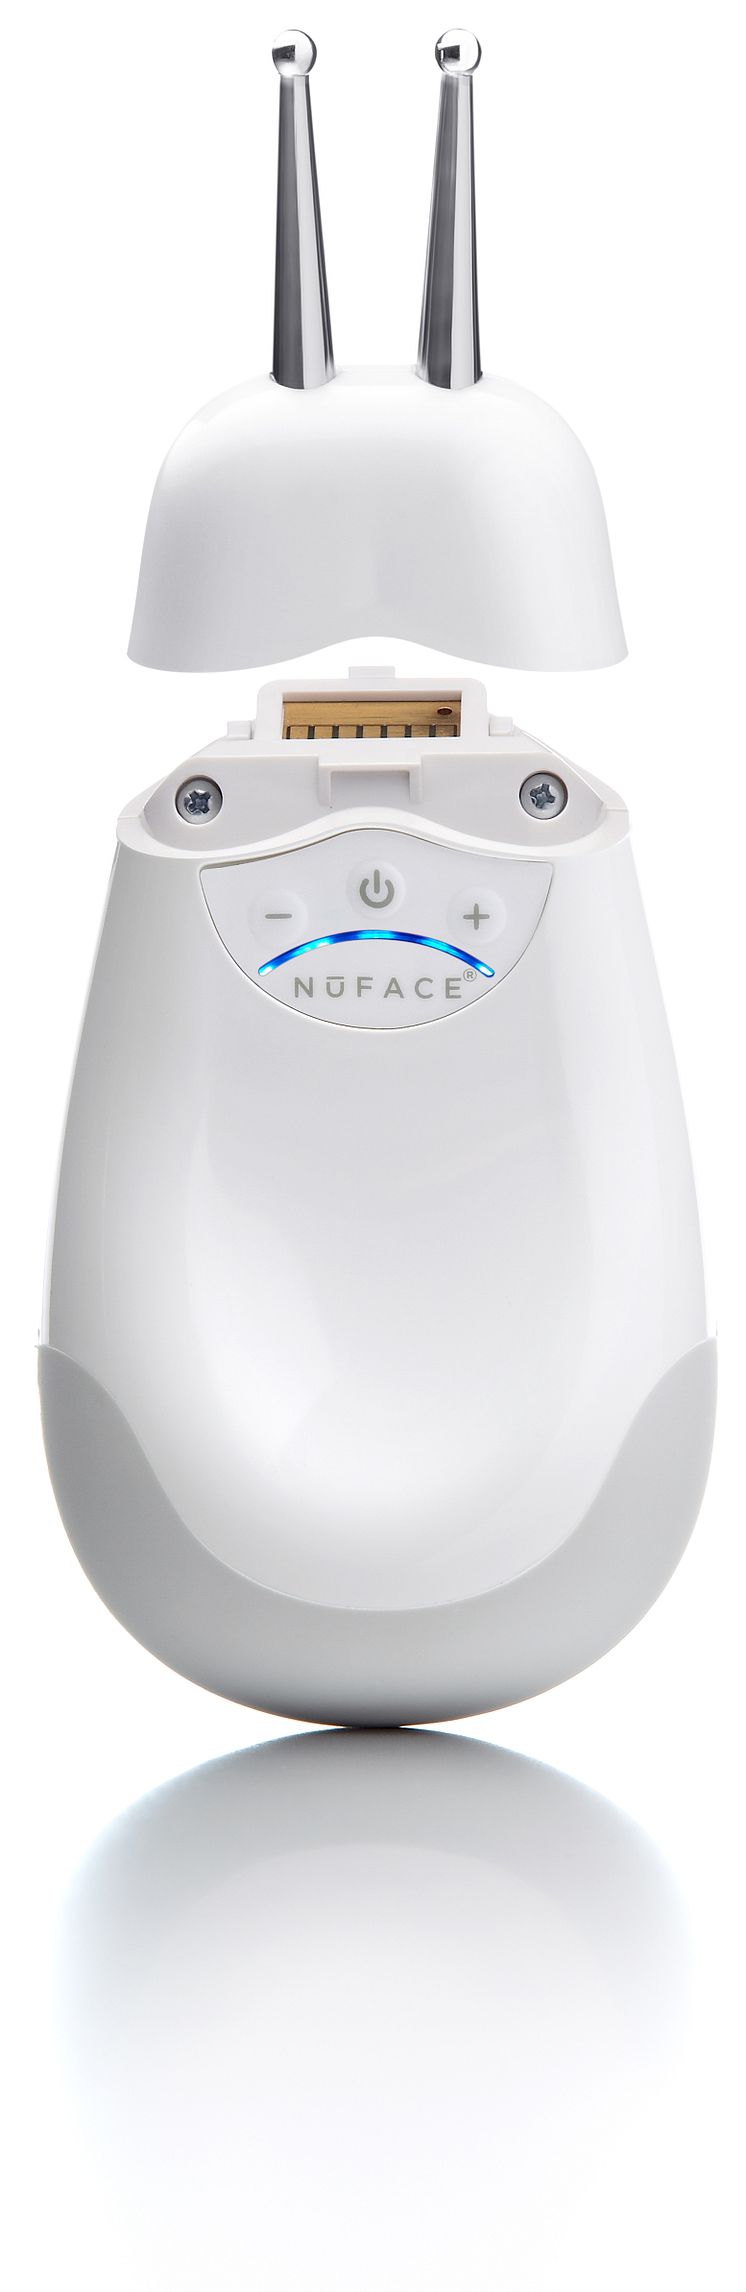 NuFACE - Fitness for your face!